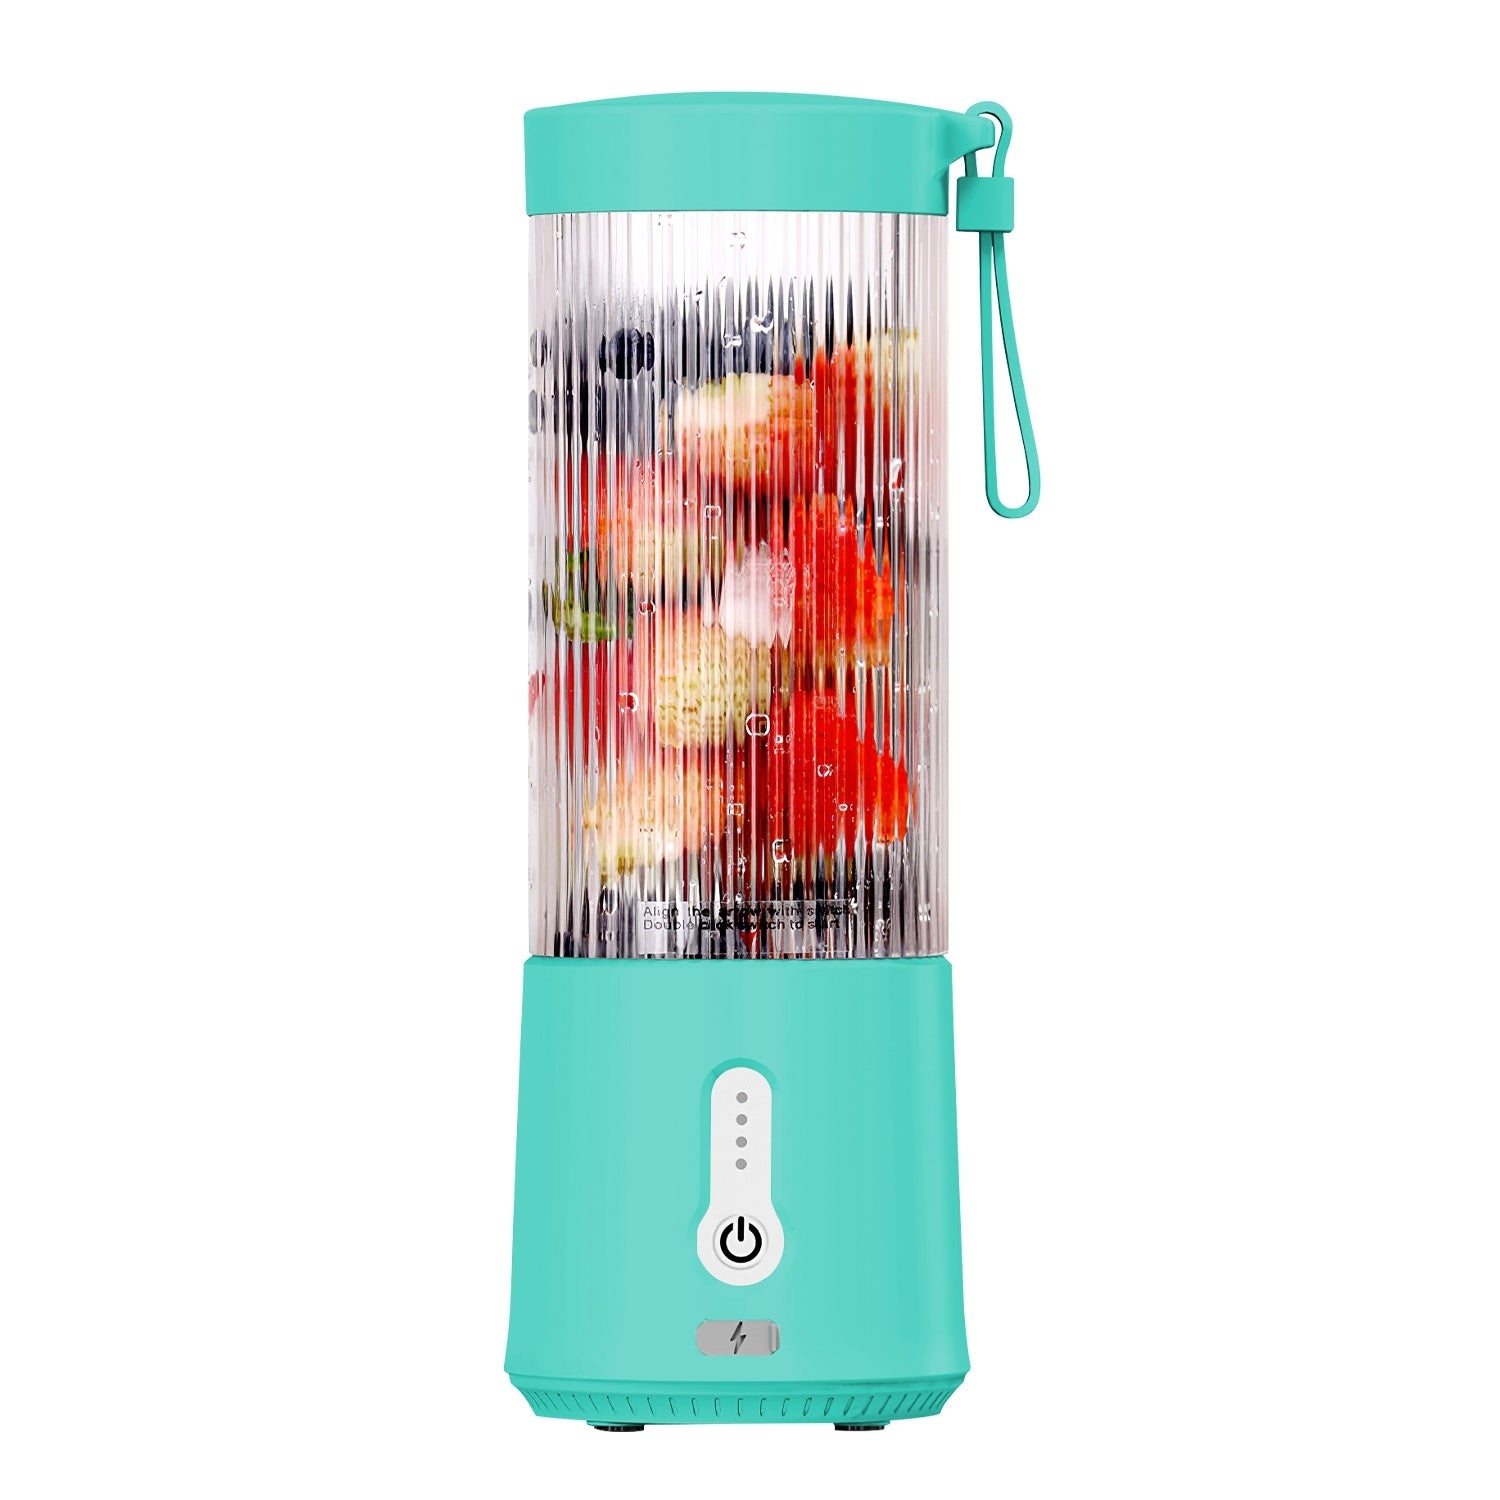 A 15.2OZ portable fruit blender with 6 blades filled with fruits and berries, featuring a capacity.